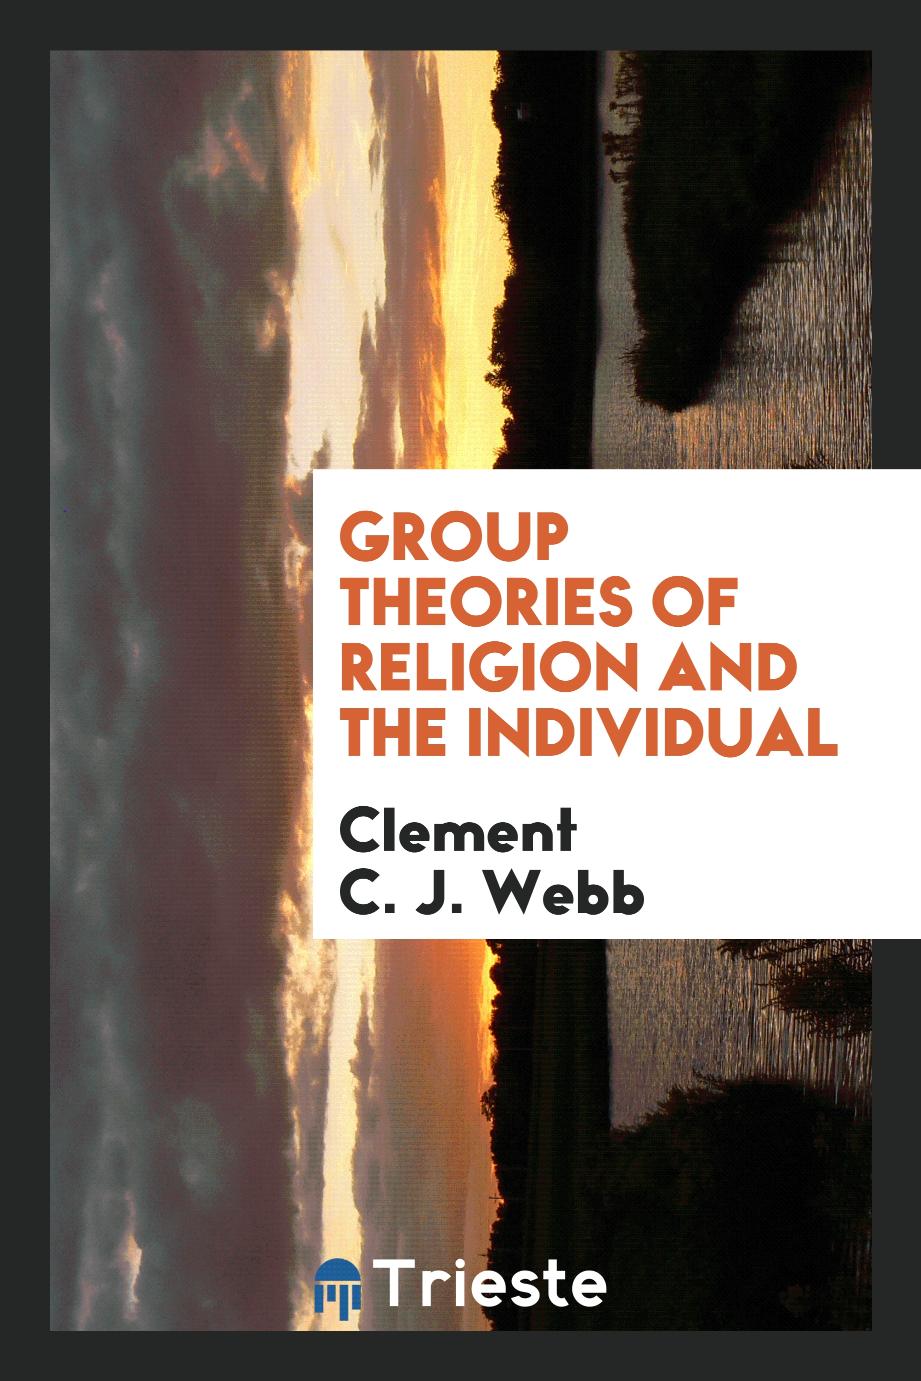 Group theories of religion and the individual